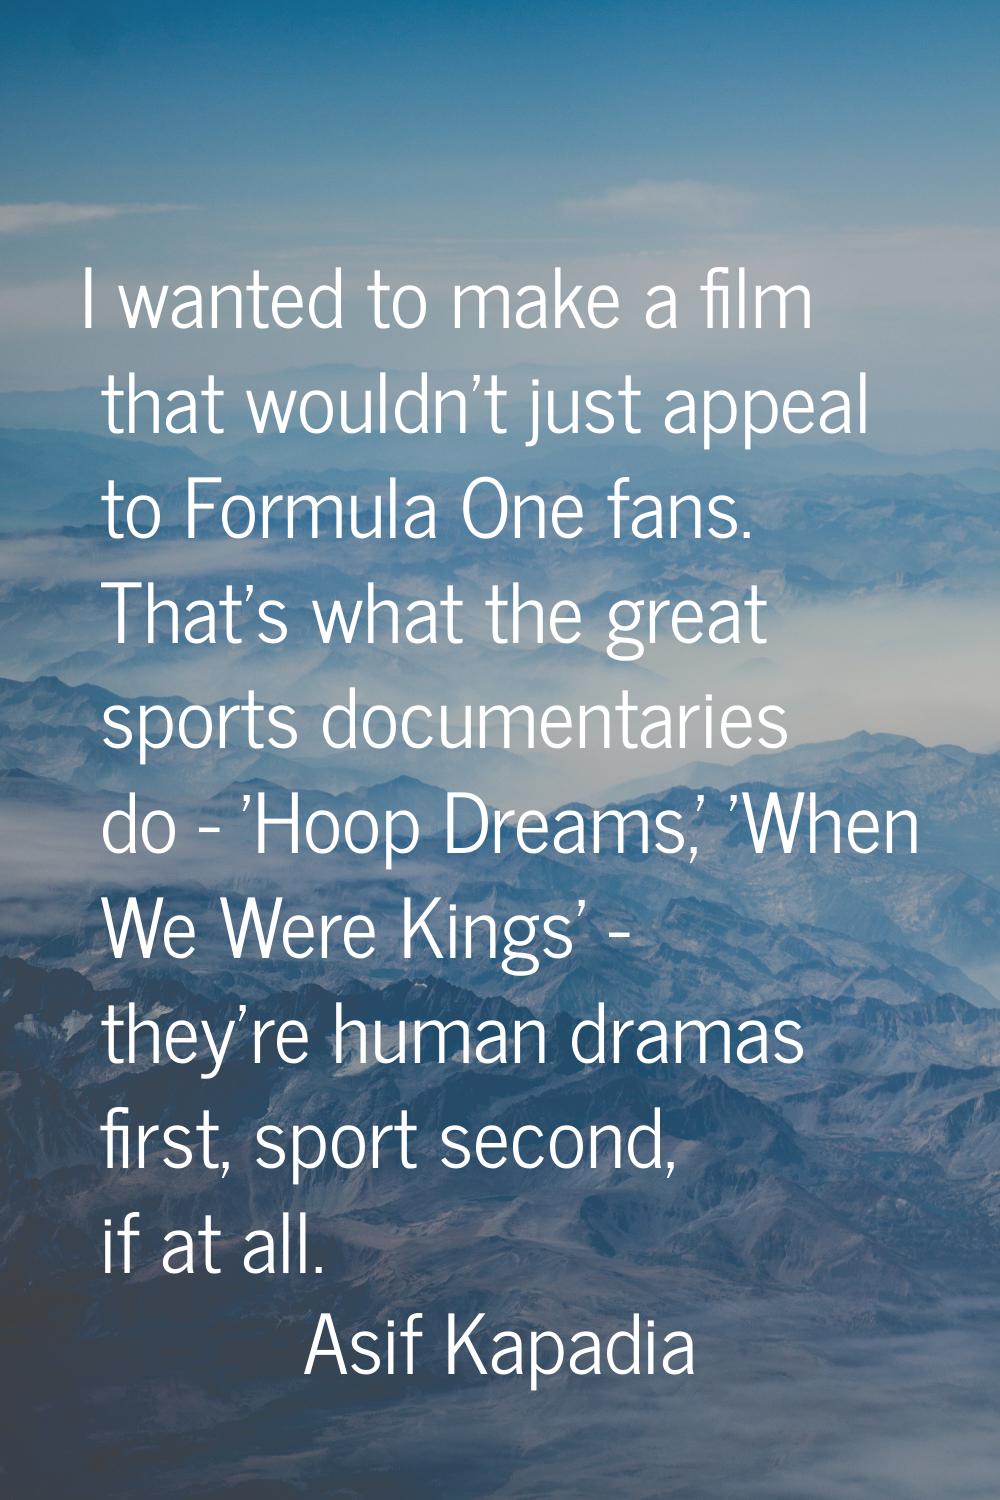 I wanted to make a film that wouldn't just appeal to Formula One fans. That's what the great sports